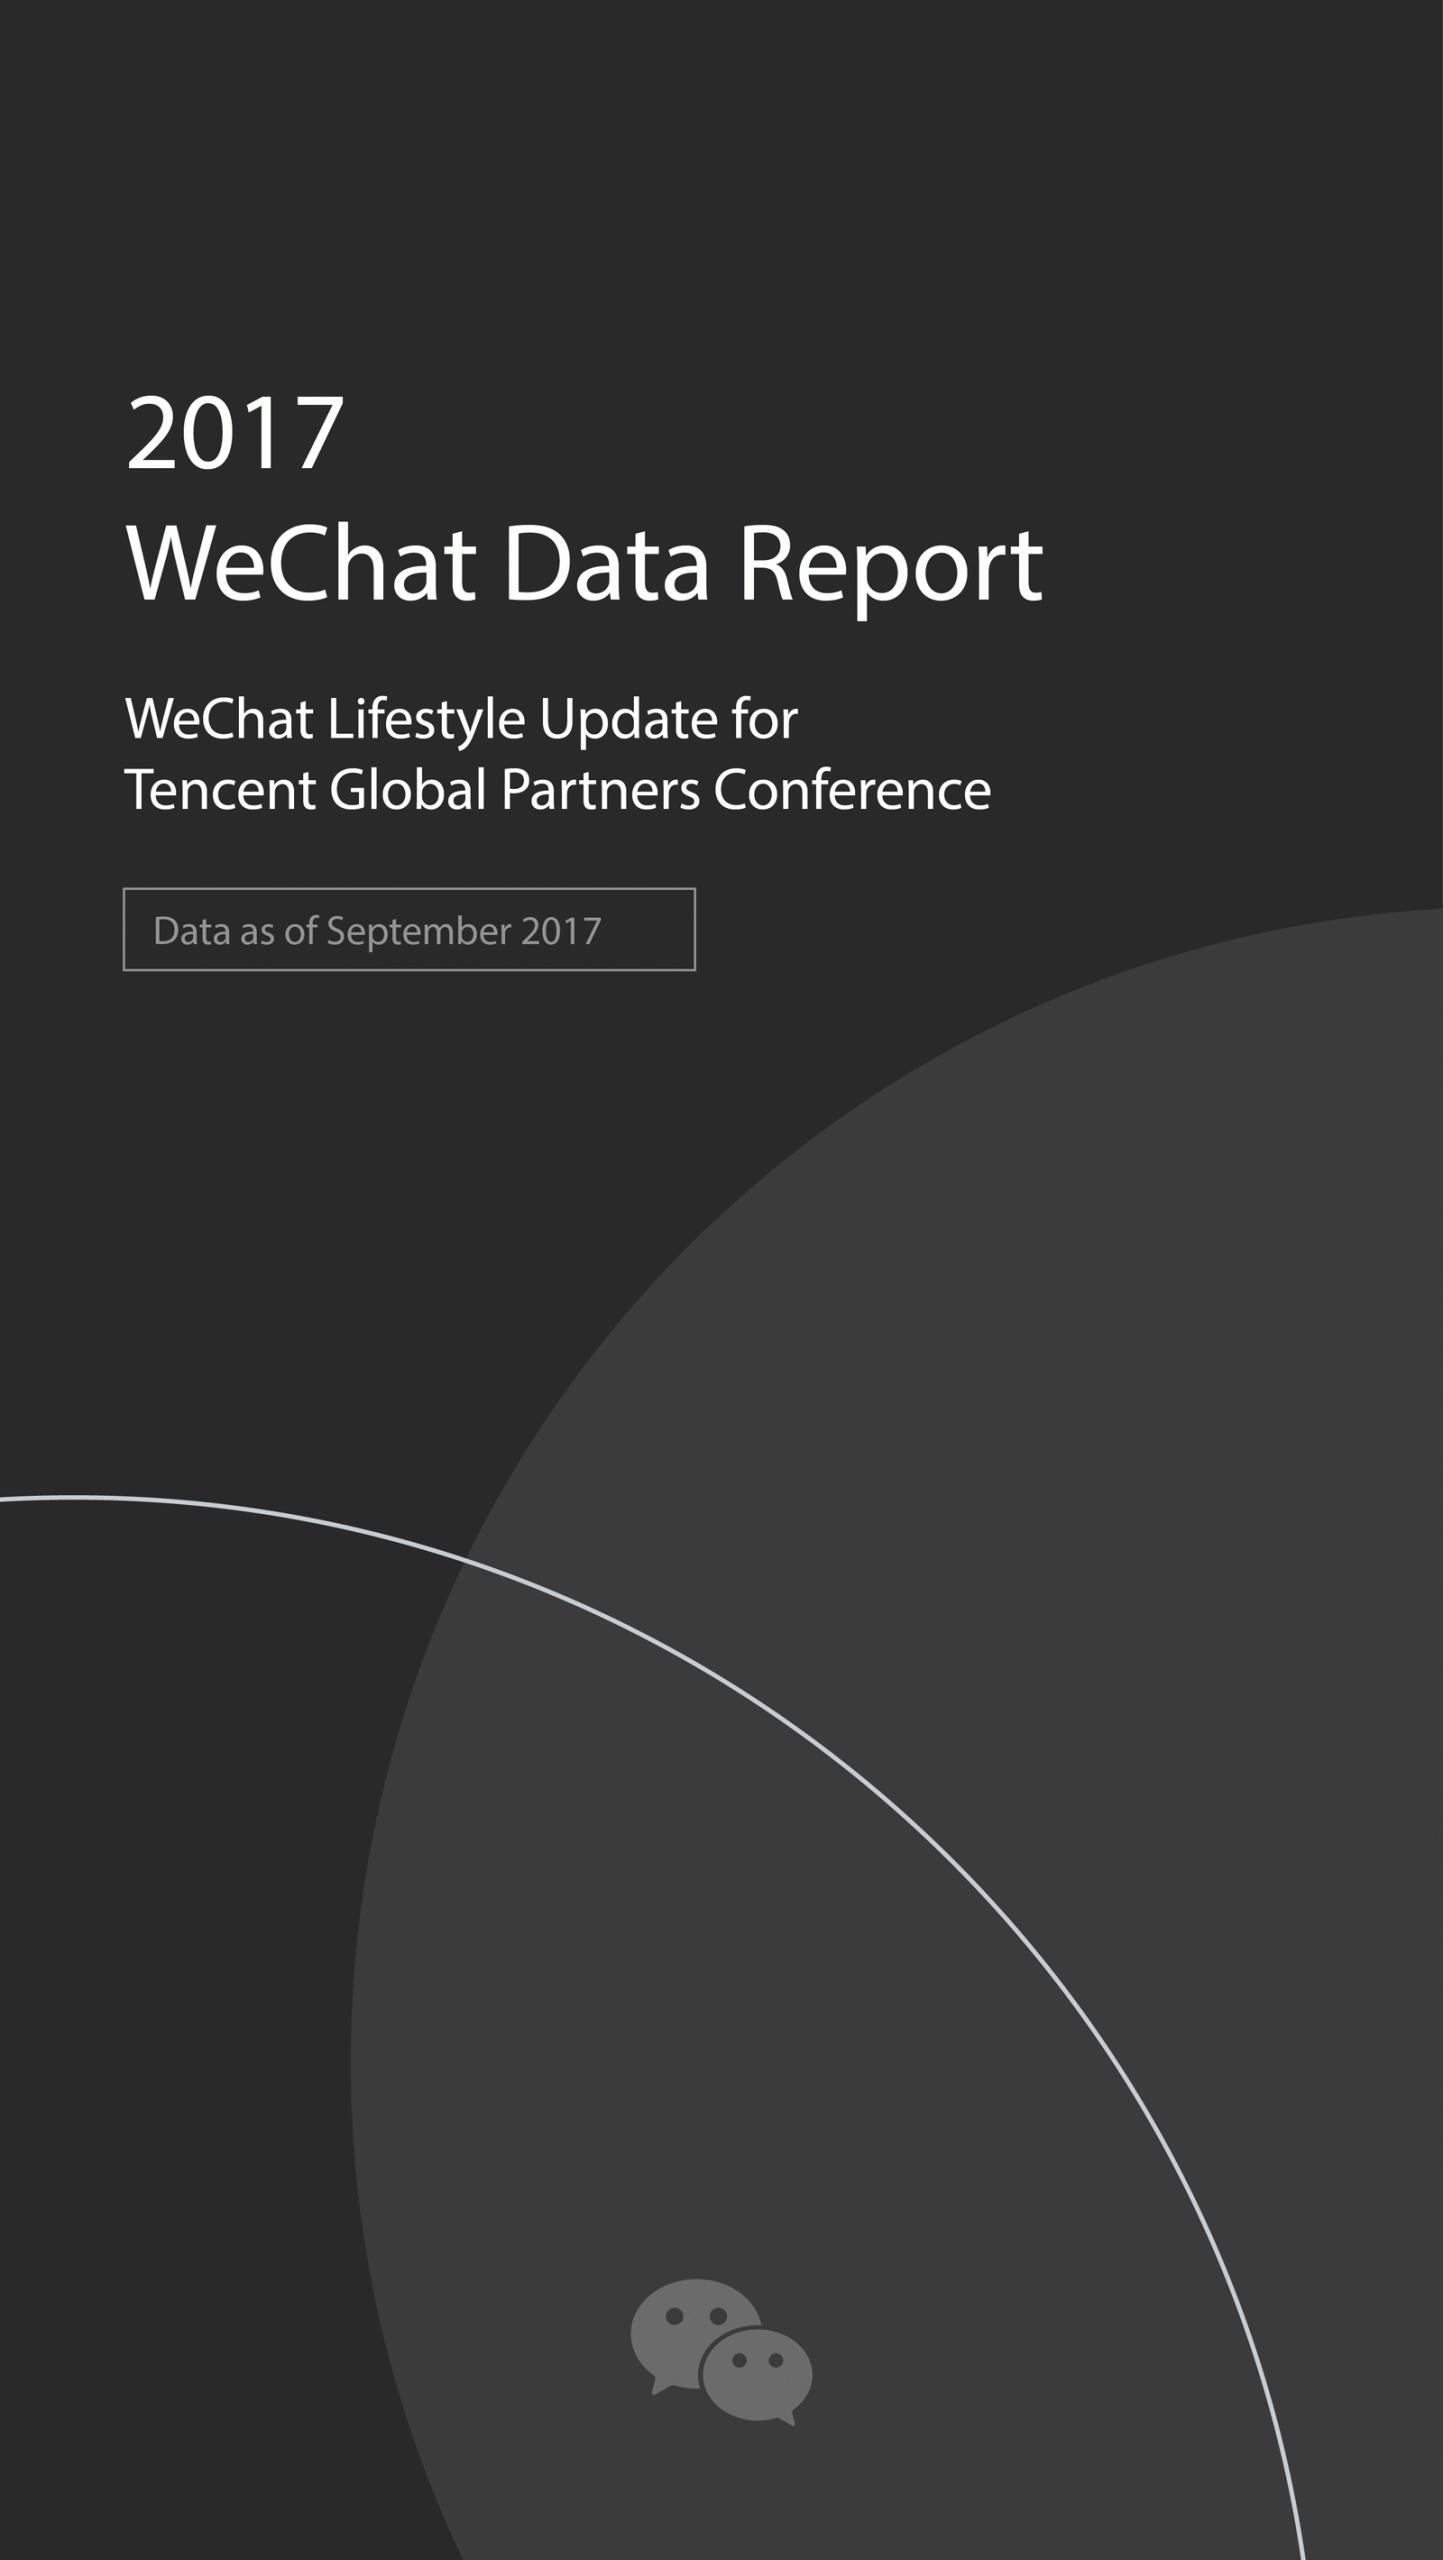 The 2017 WeChat Data Report